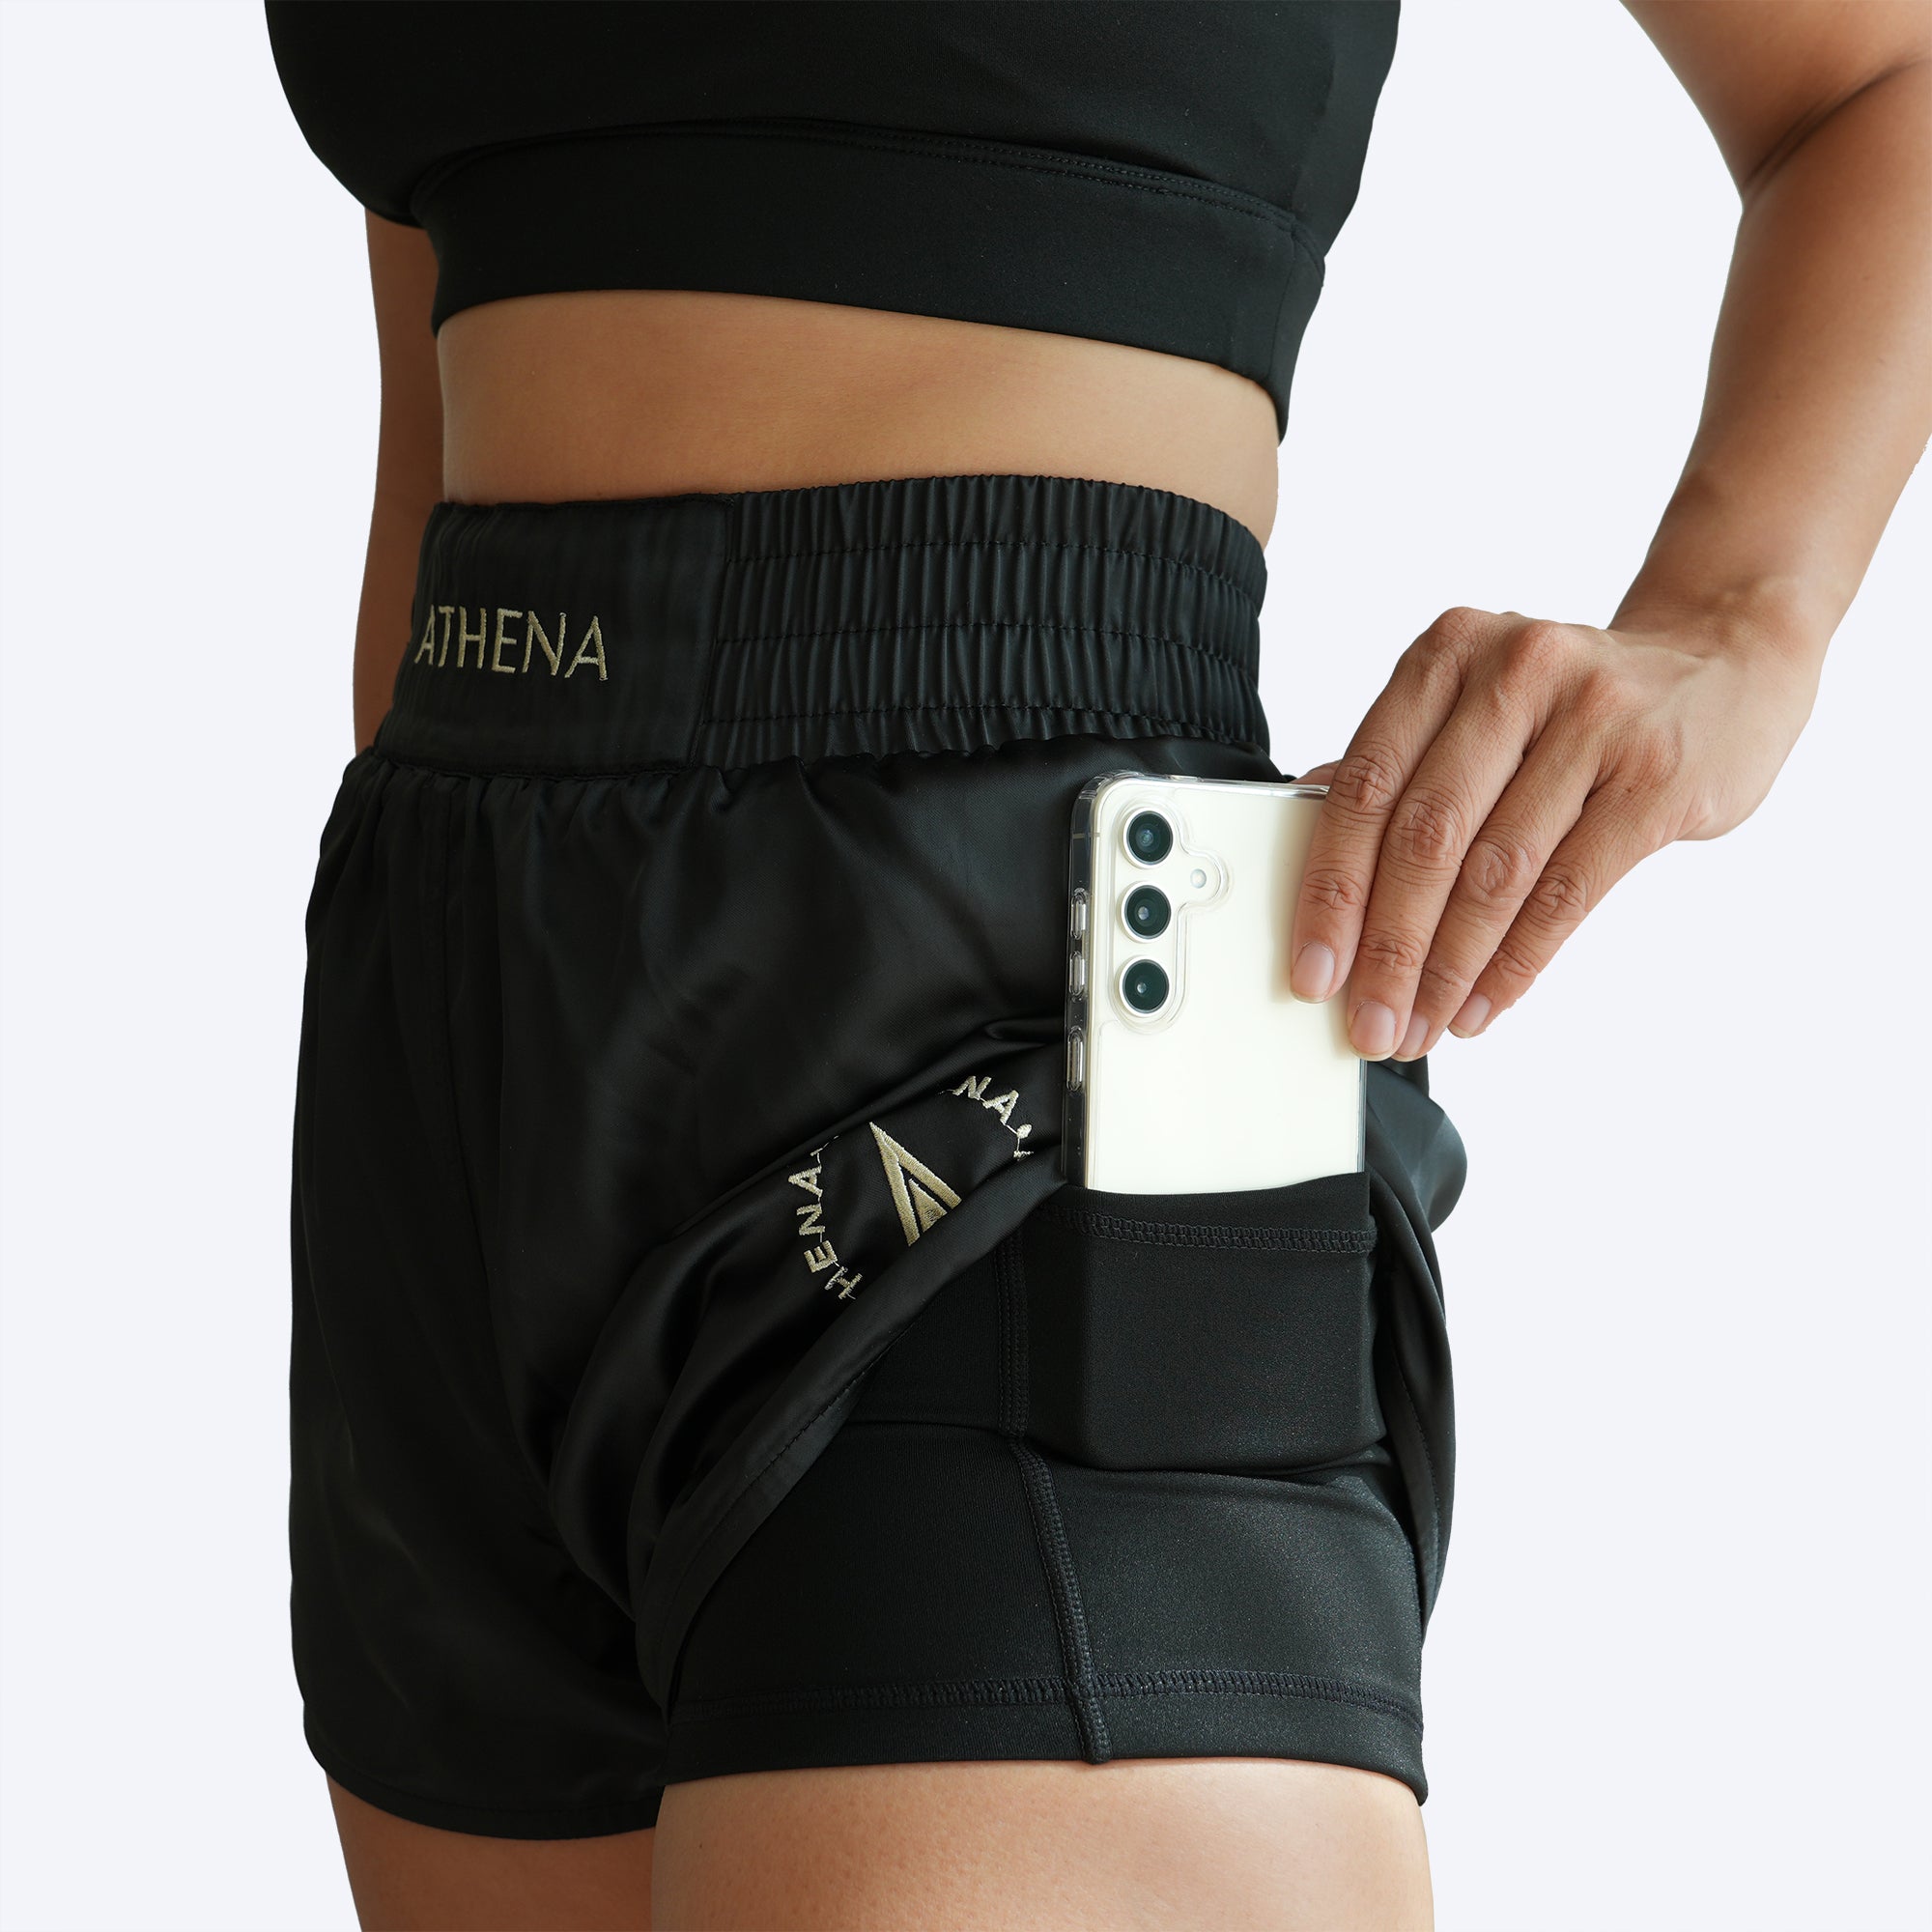 Athena Fightwear Enyo women's muay thai shorts black gold with wide hips and built in safety shorts with anti camel toe anti ride up and pockets